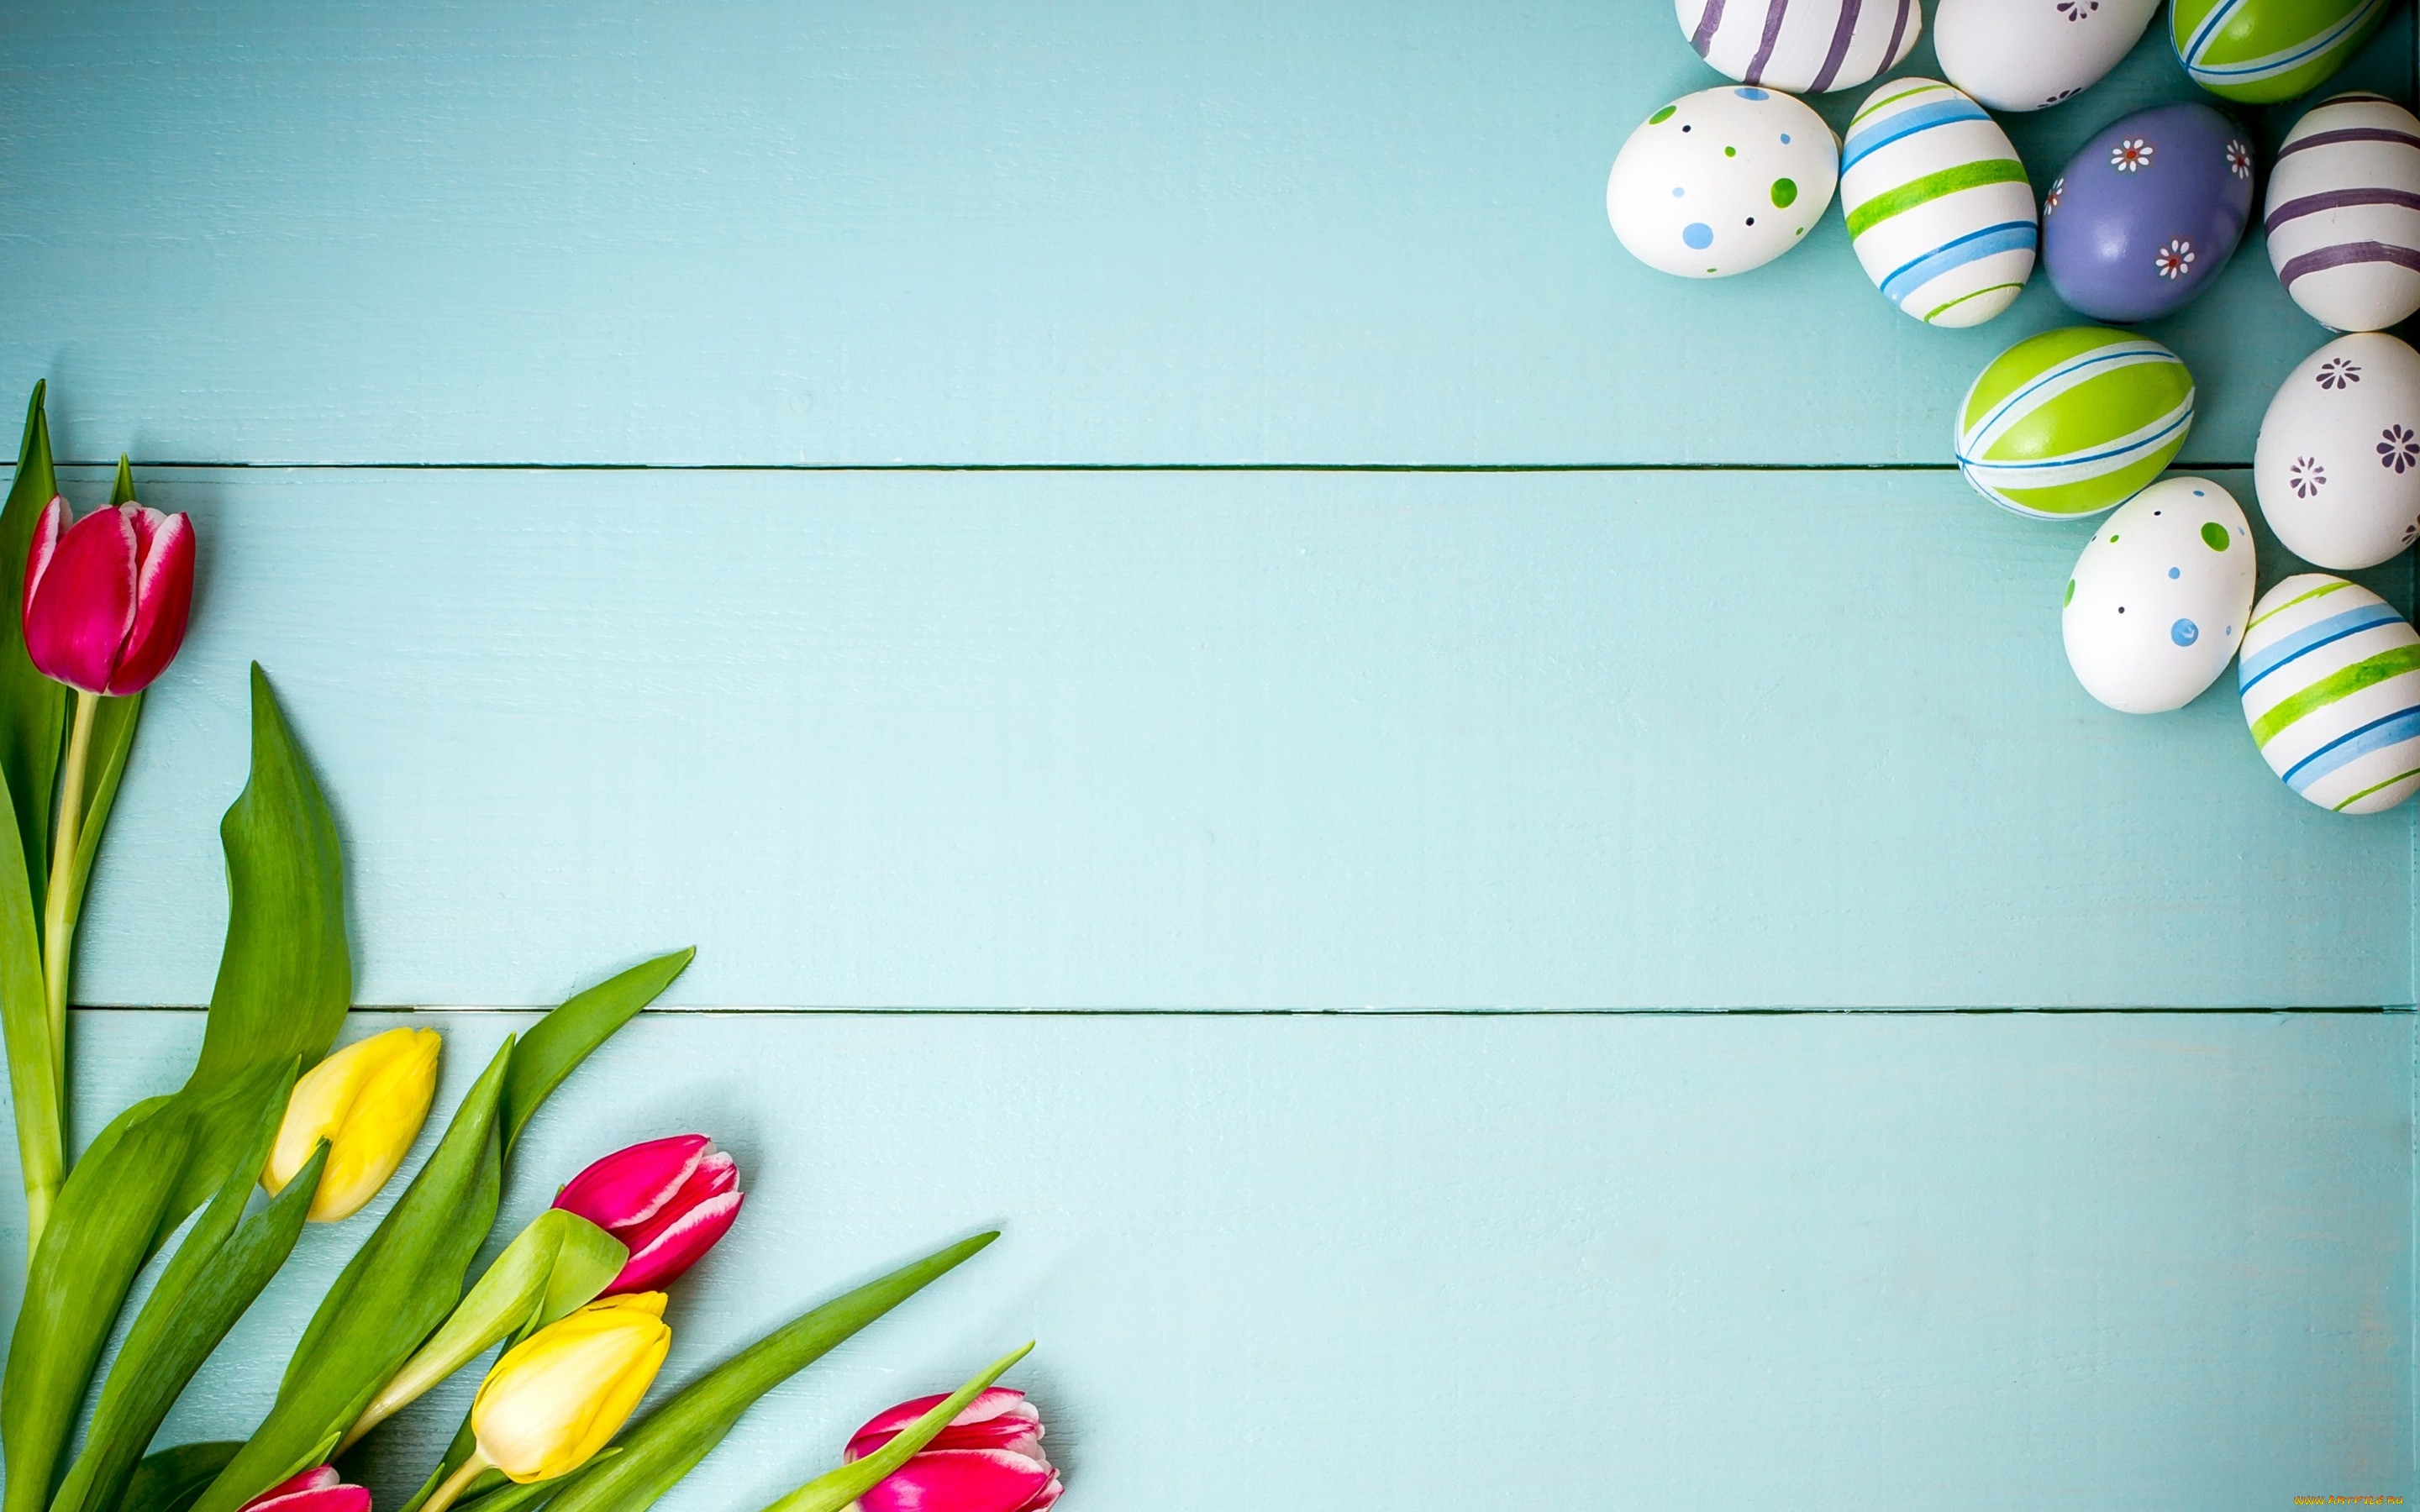 , , , wood, decoration, spring, happy, , , tulips, , easter, , eggs, flowers, colorful